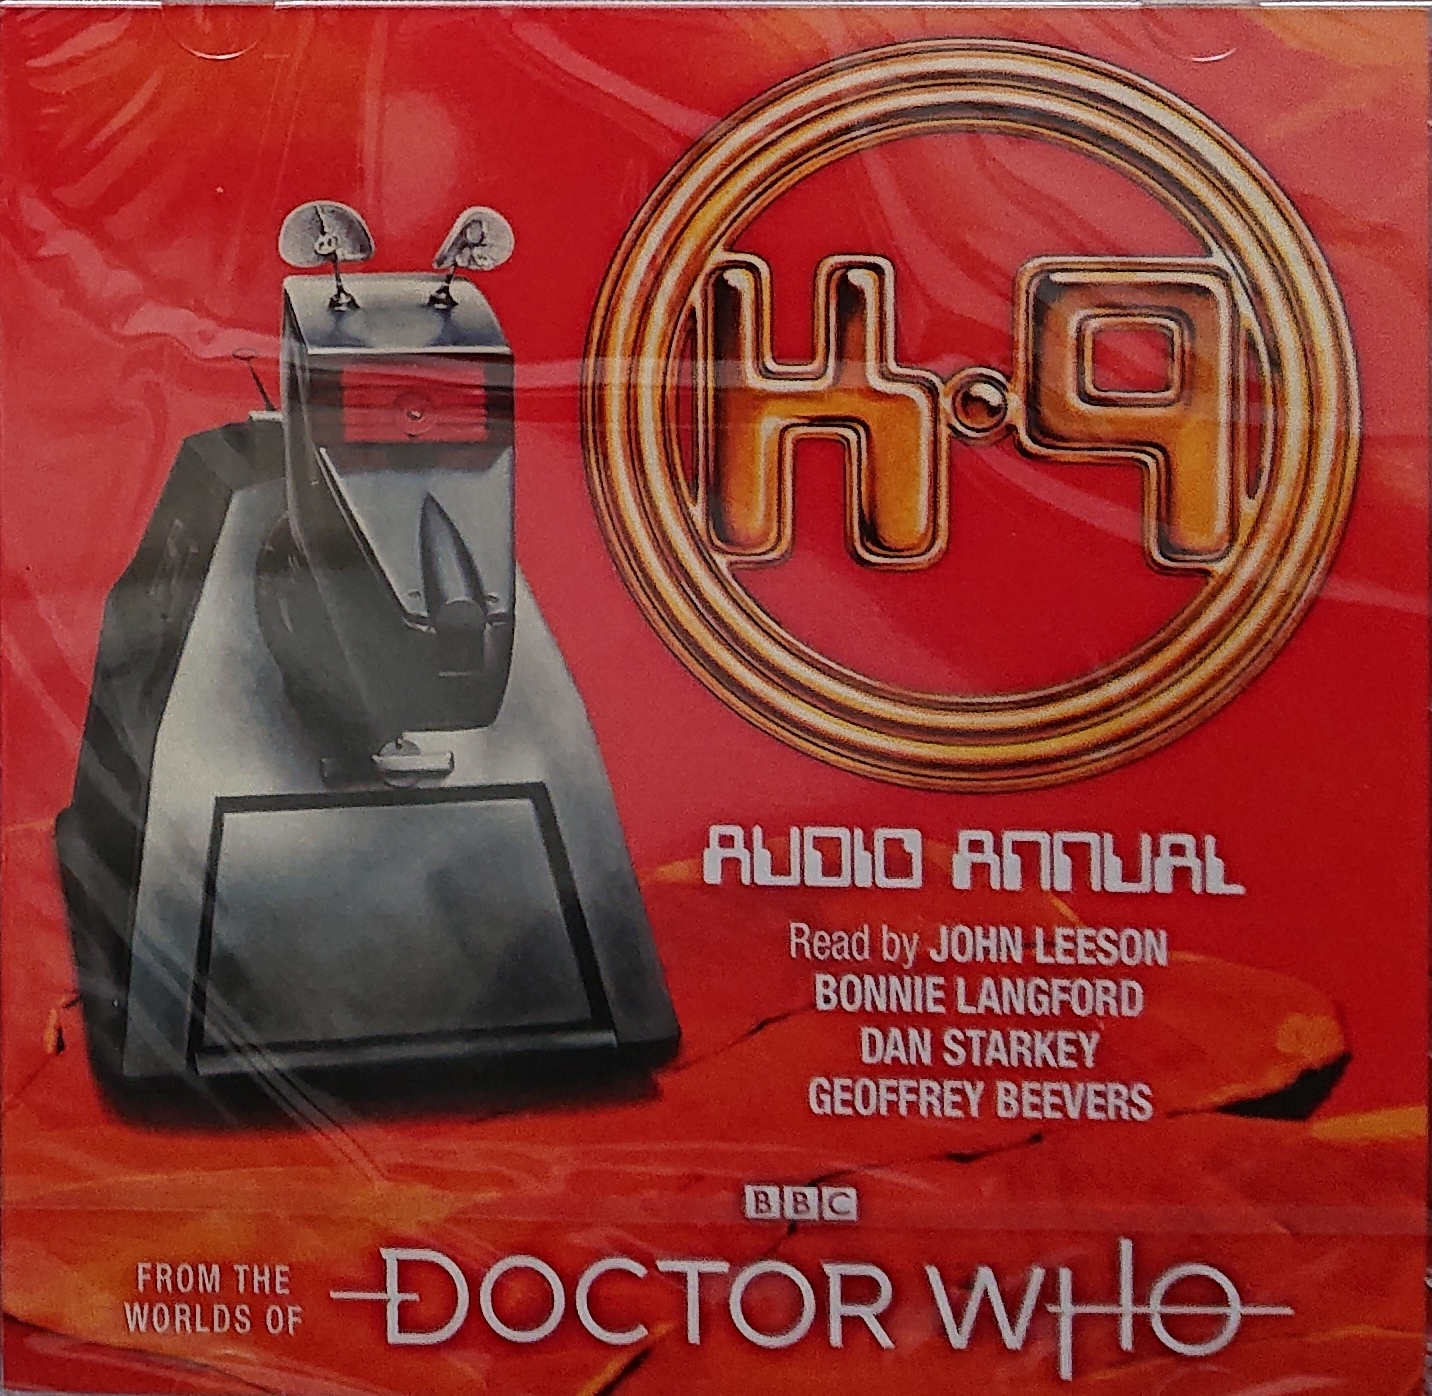 Picture of ISBN 978-1-52913-829-0 Doctor Who - Audio annual K-9 by artist Various from the BBC cds - Records and Tapes library